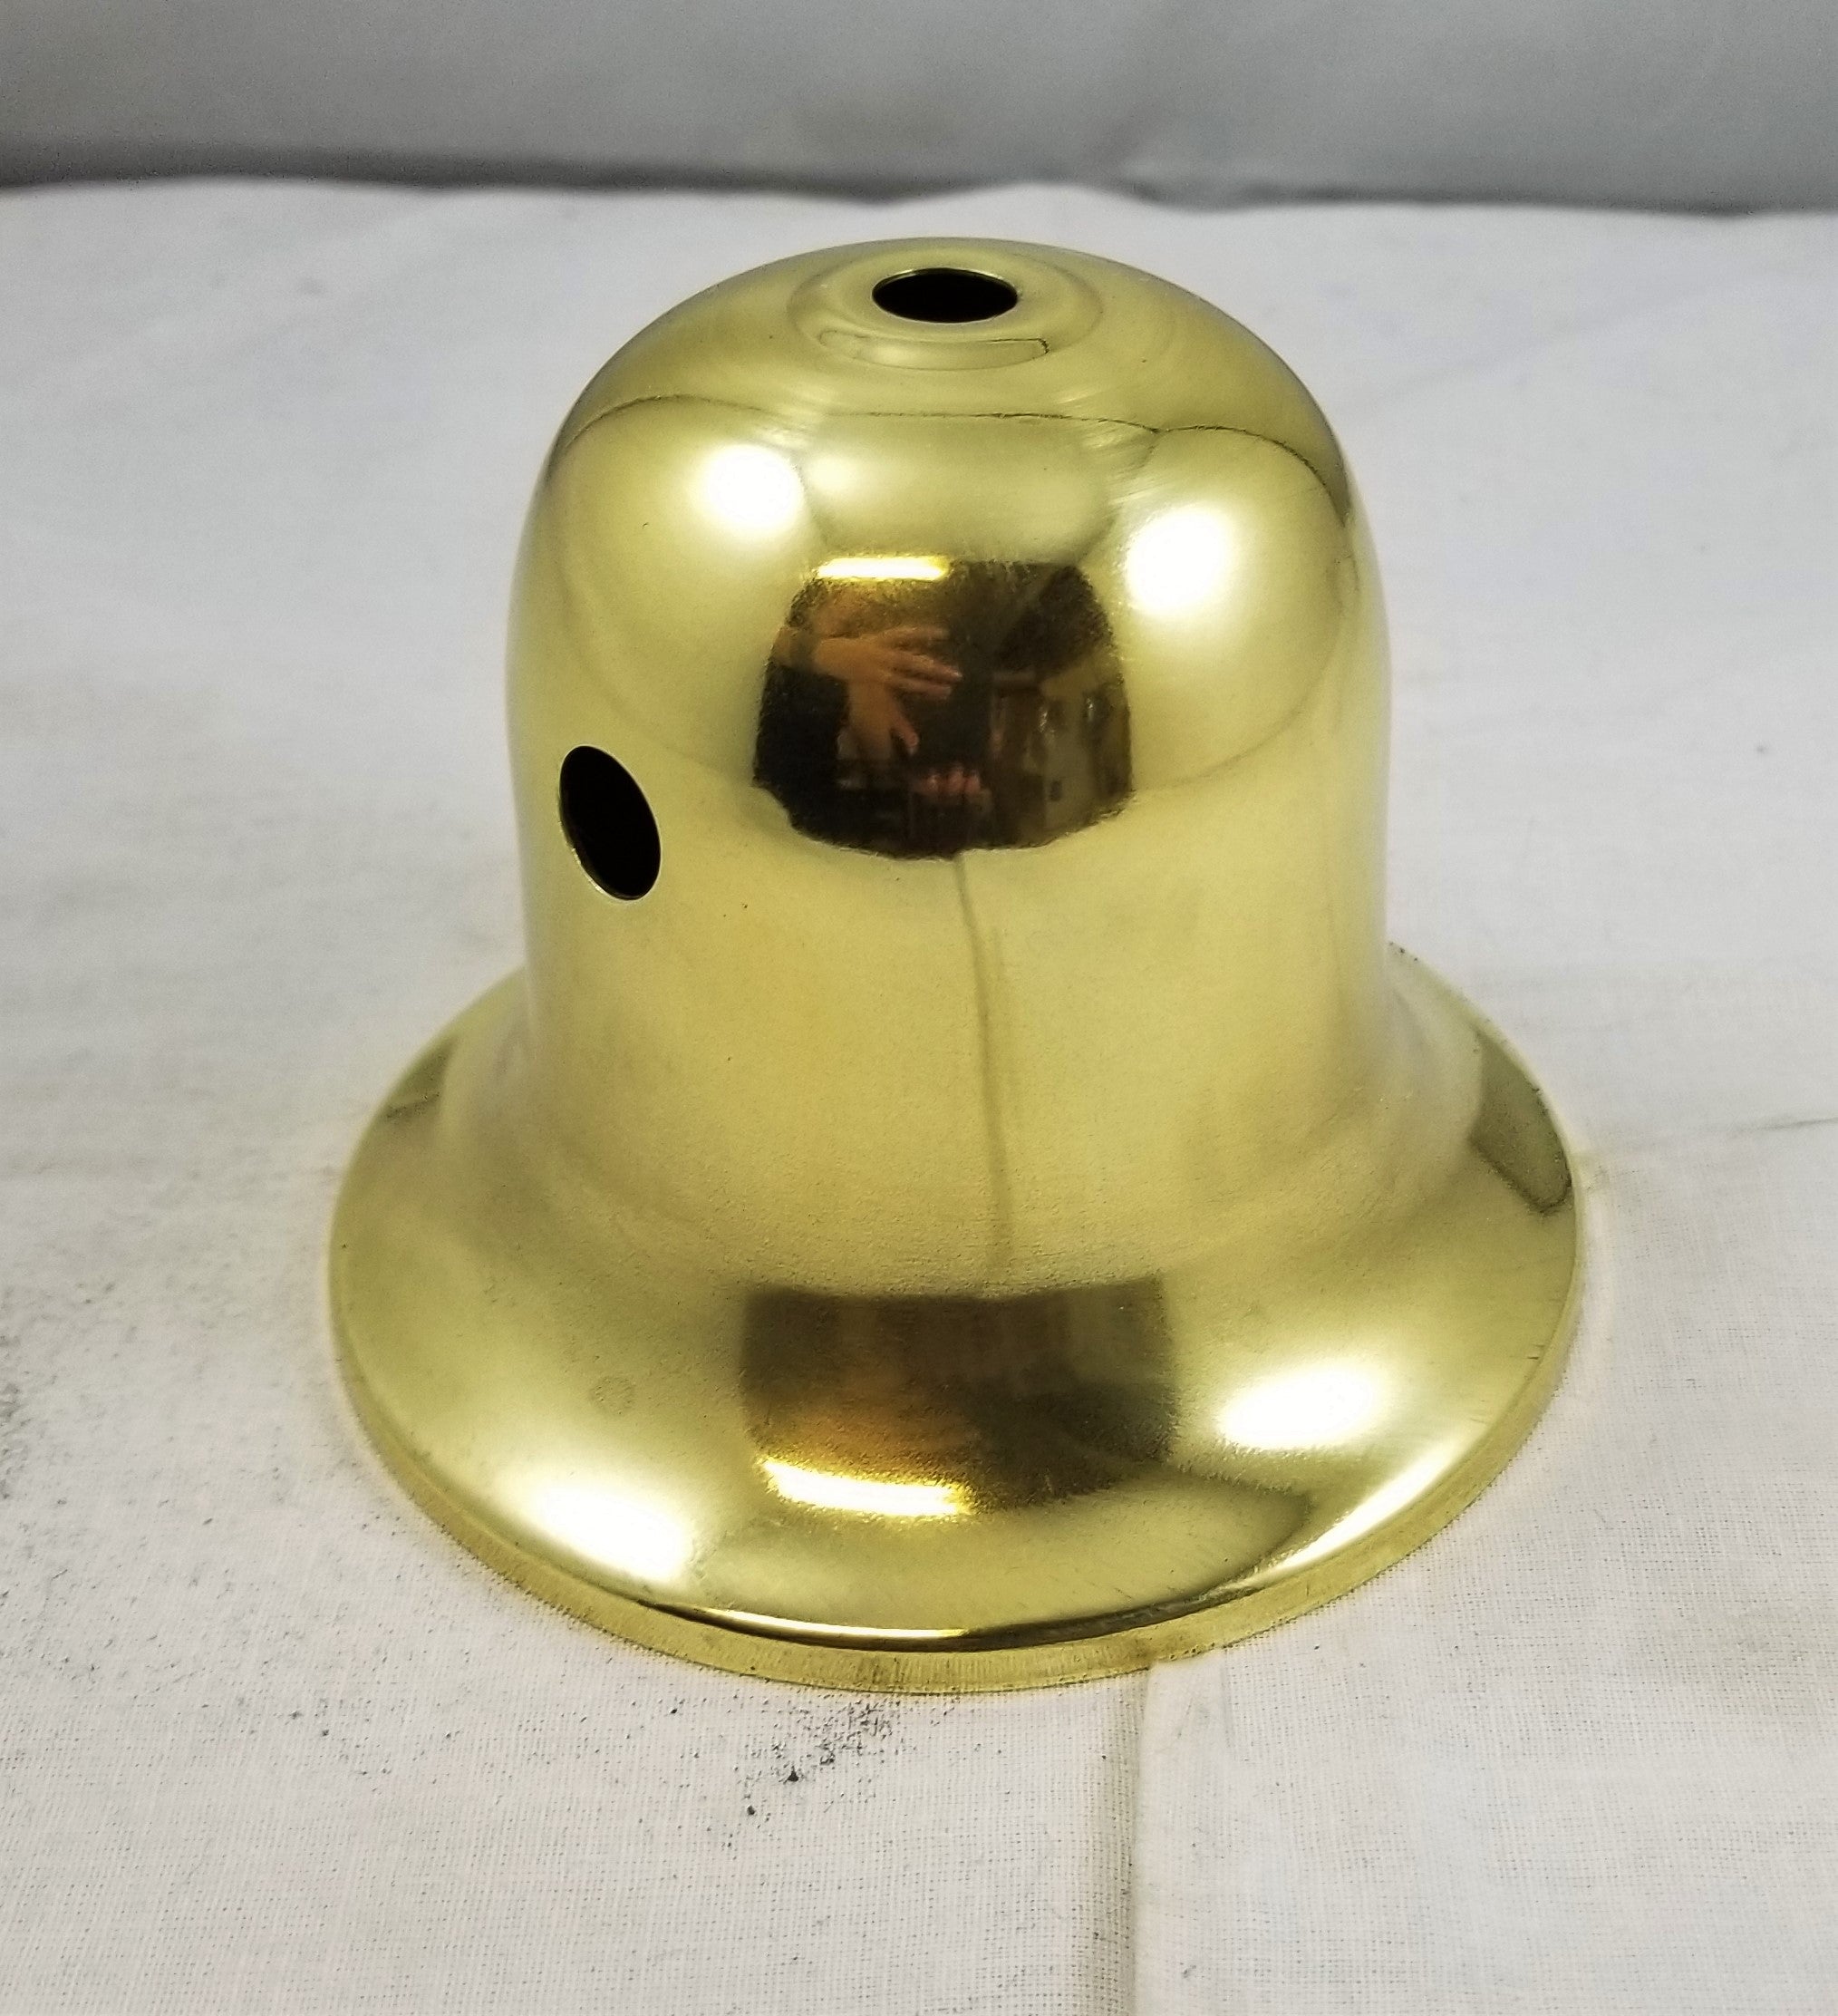 Polished and Lacquered Brass Holder for a 2-5/8" Fitter